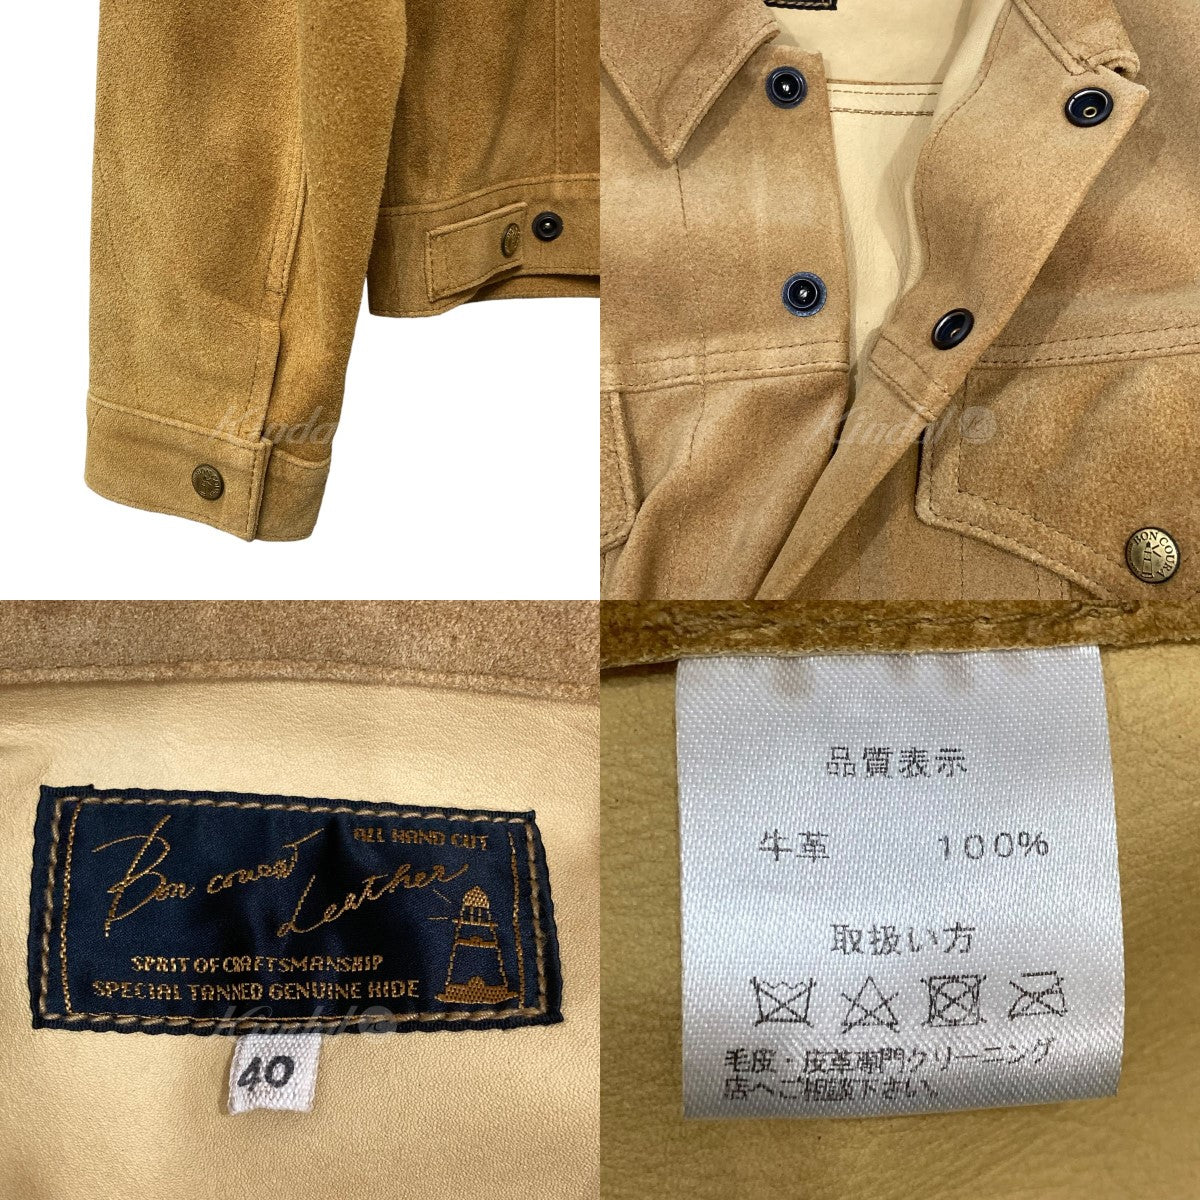 BONCOURA(ボンクラ) 「Leather Jacket 3rd Suede」 スエードレザー 